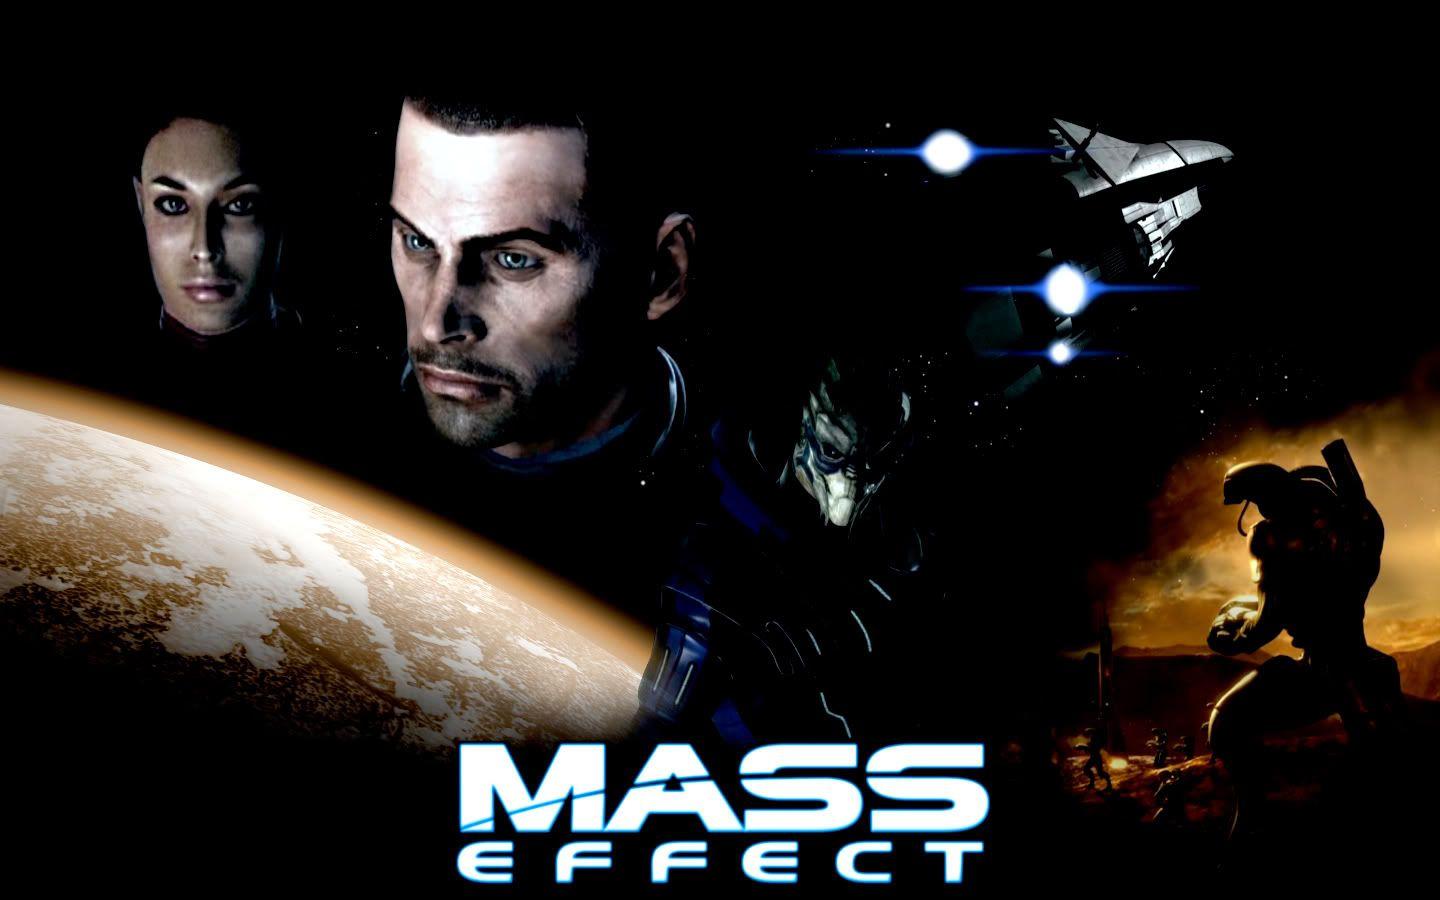 Mass Effect Wallpaper and general discussion